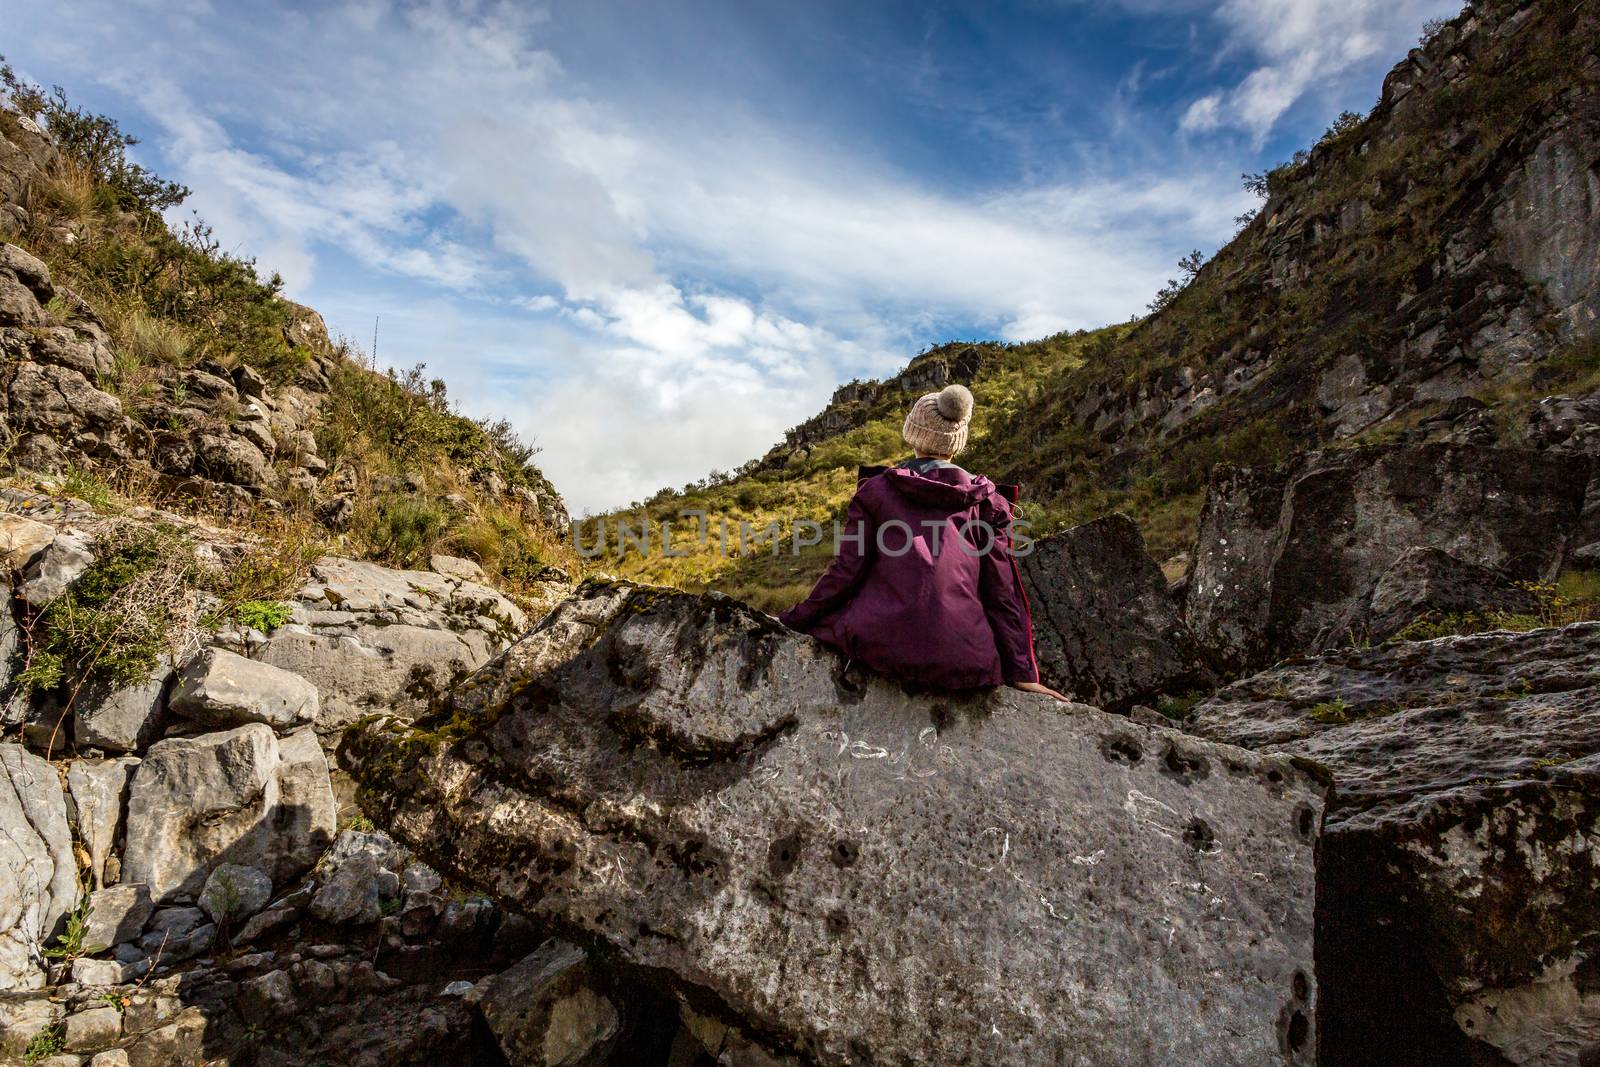 A woman sits on an ancient rock exposed and full of fossils from the sea. The elevation of the land now over 1200 metres above sea level, located in Snowy Mountains Kosciuszko National Park